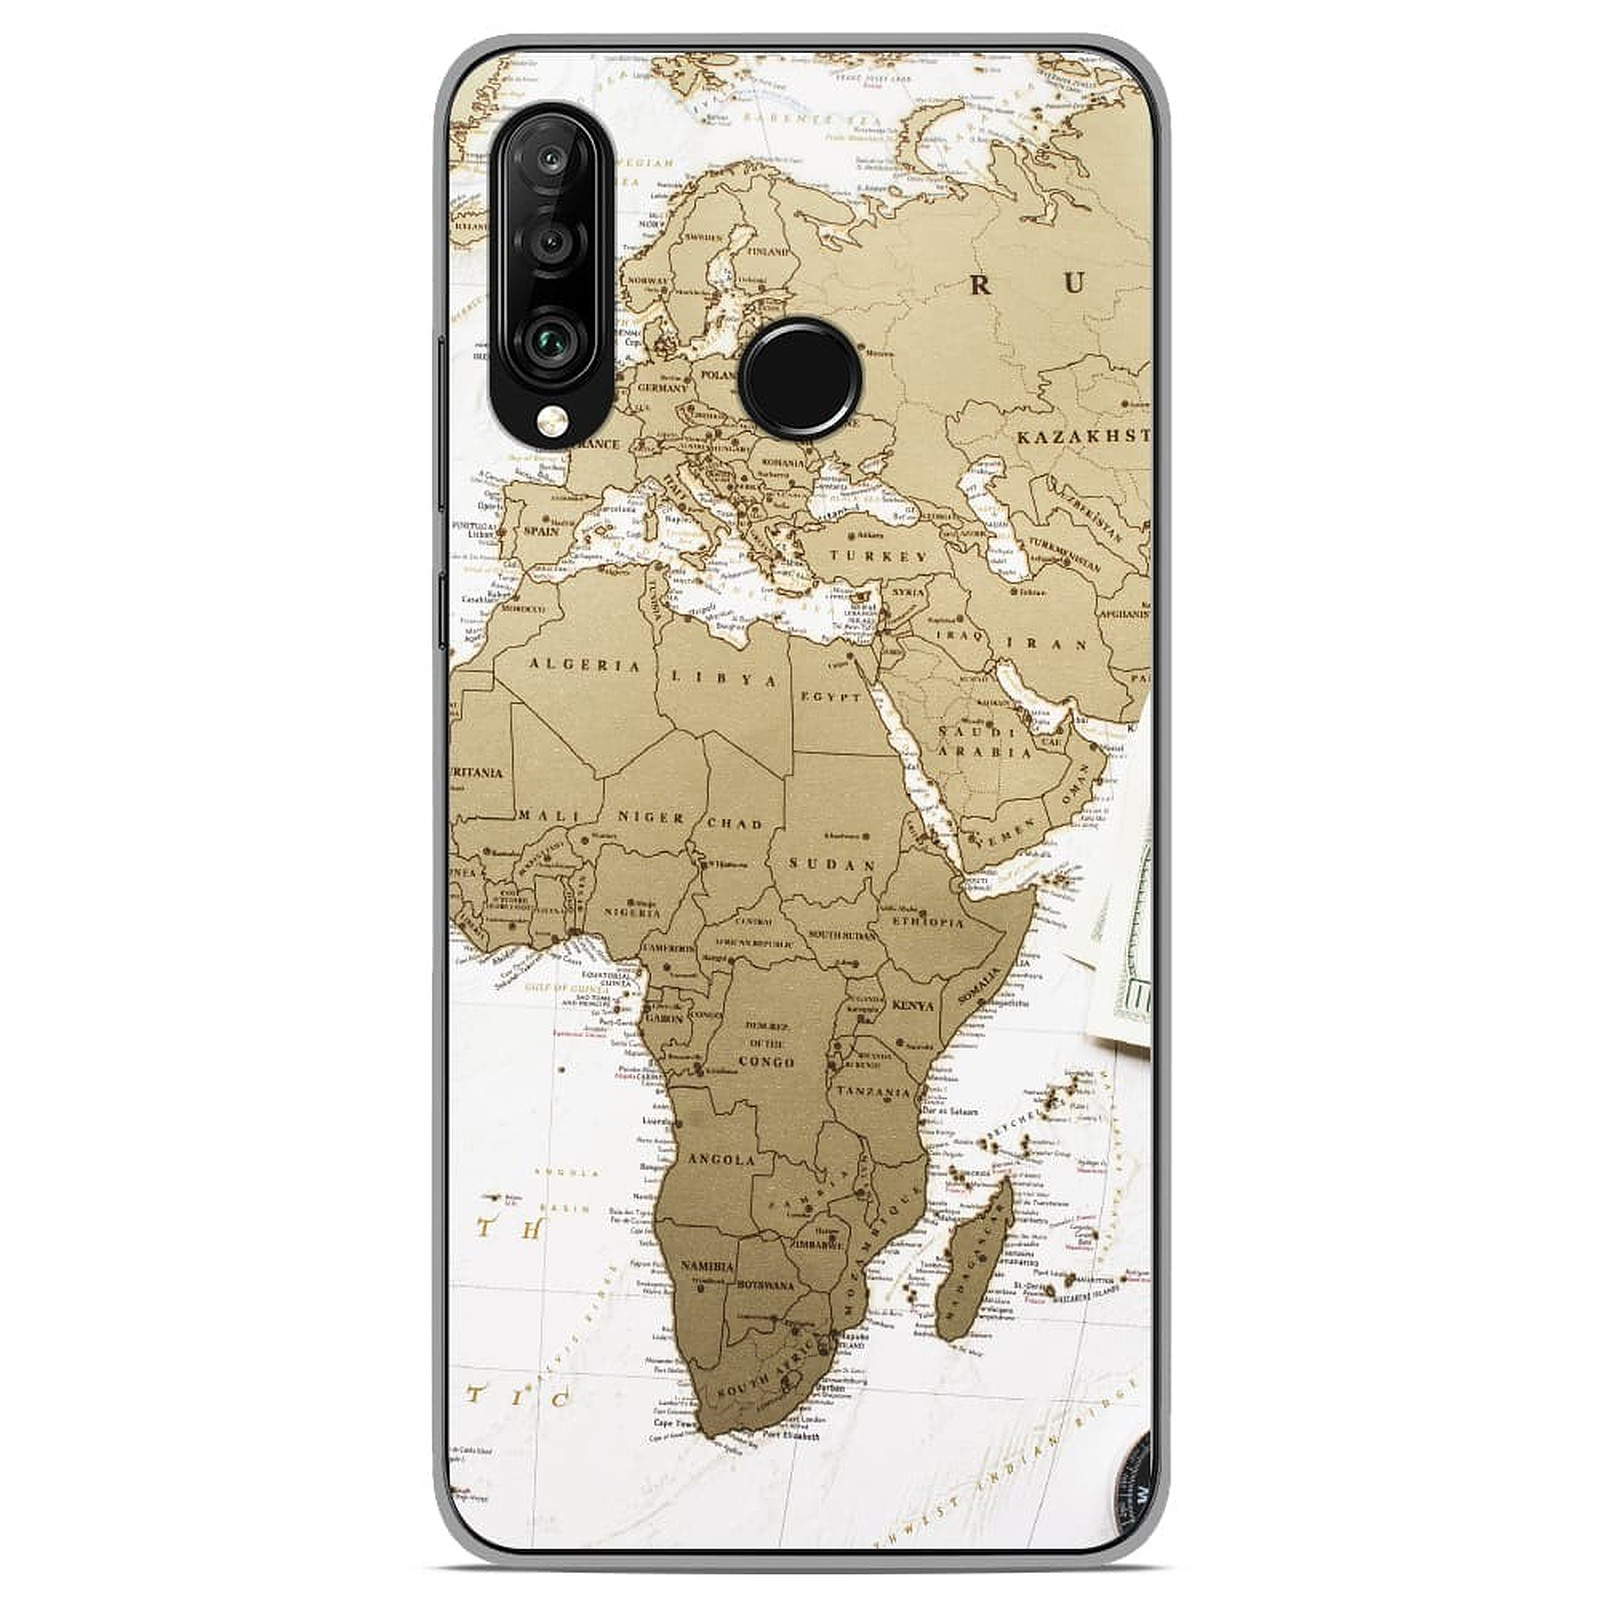 1001 Coques Coque silicone gel Huawei P30 Lite motif Map Europe Afrique - Coque telephone 1001Coques